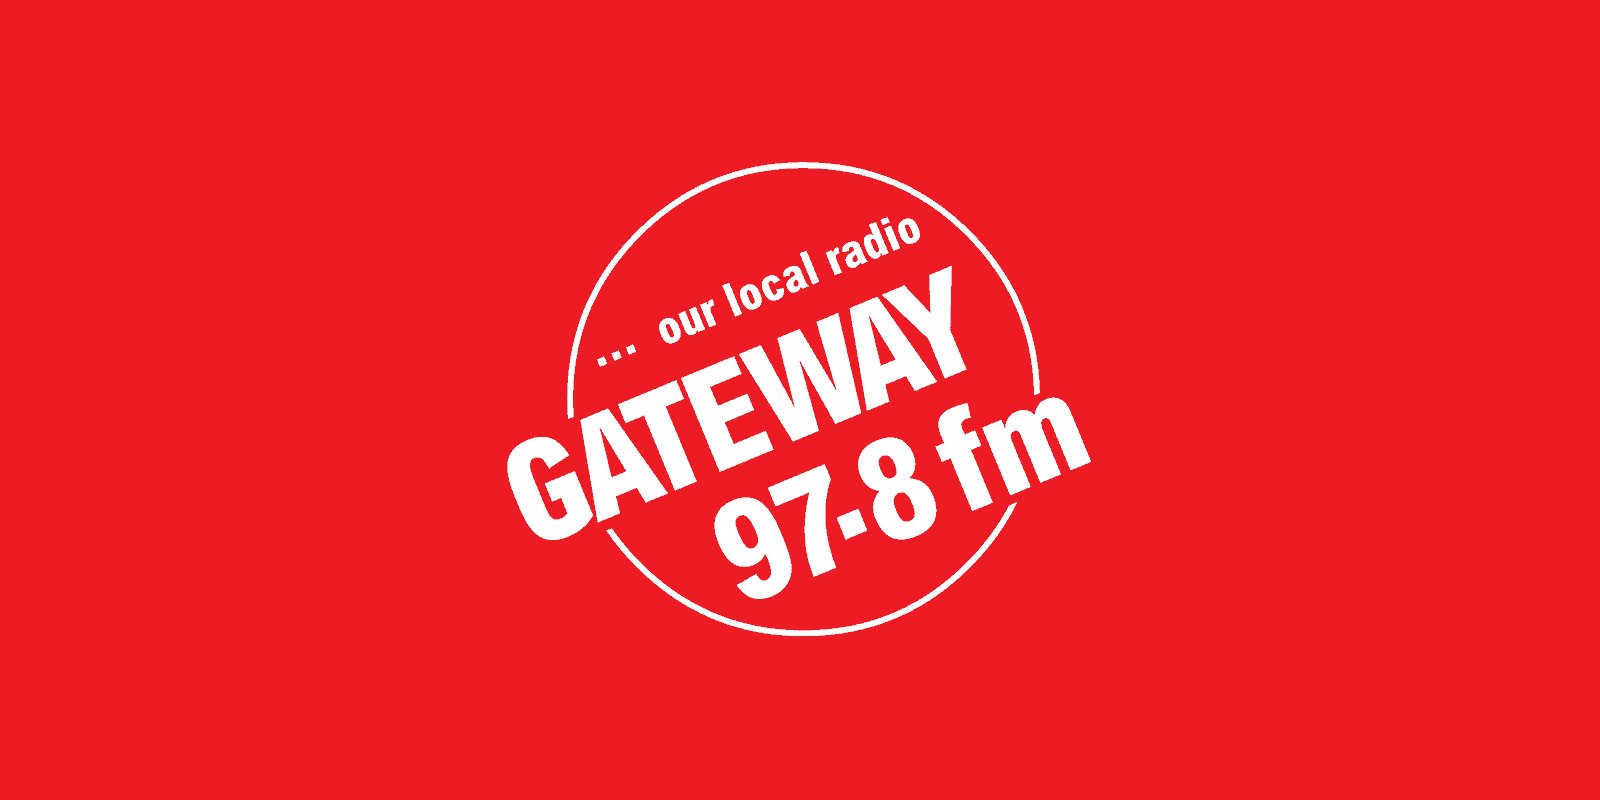 Featured image for “Happy New Year from Gateway 97.8”